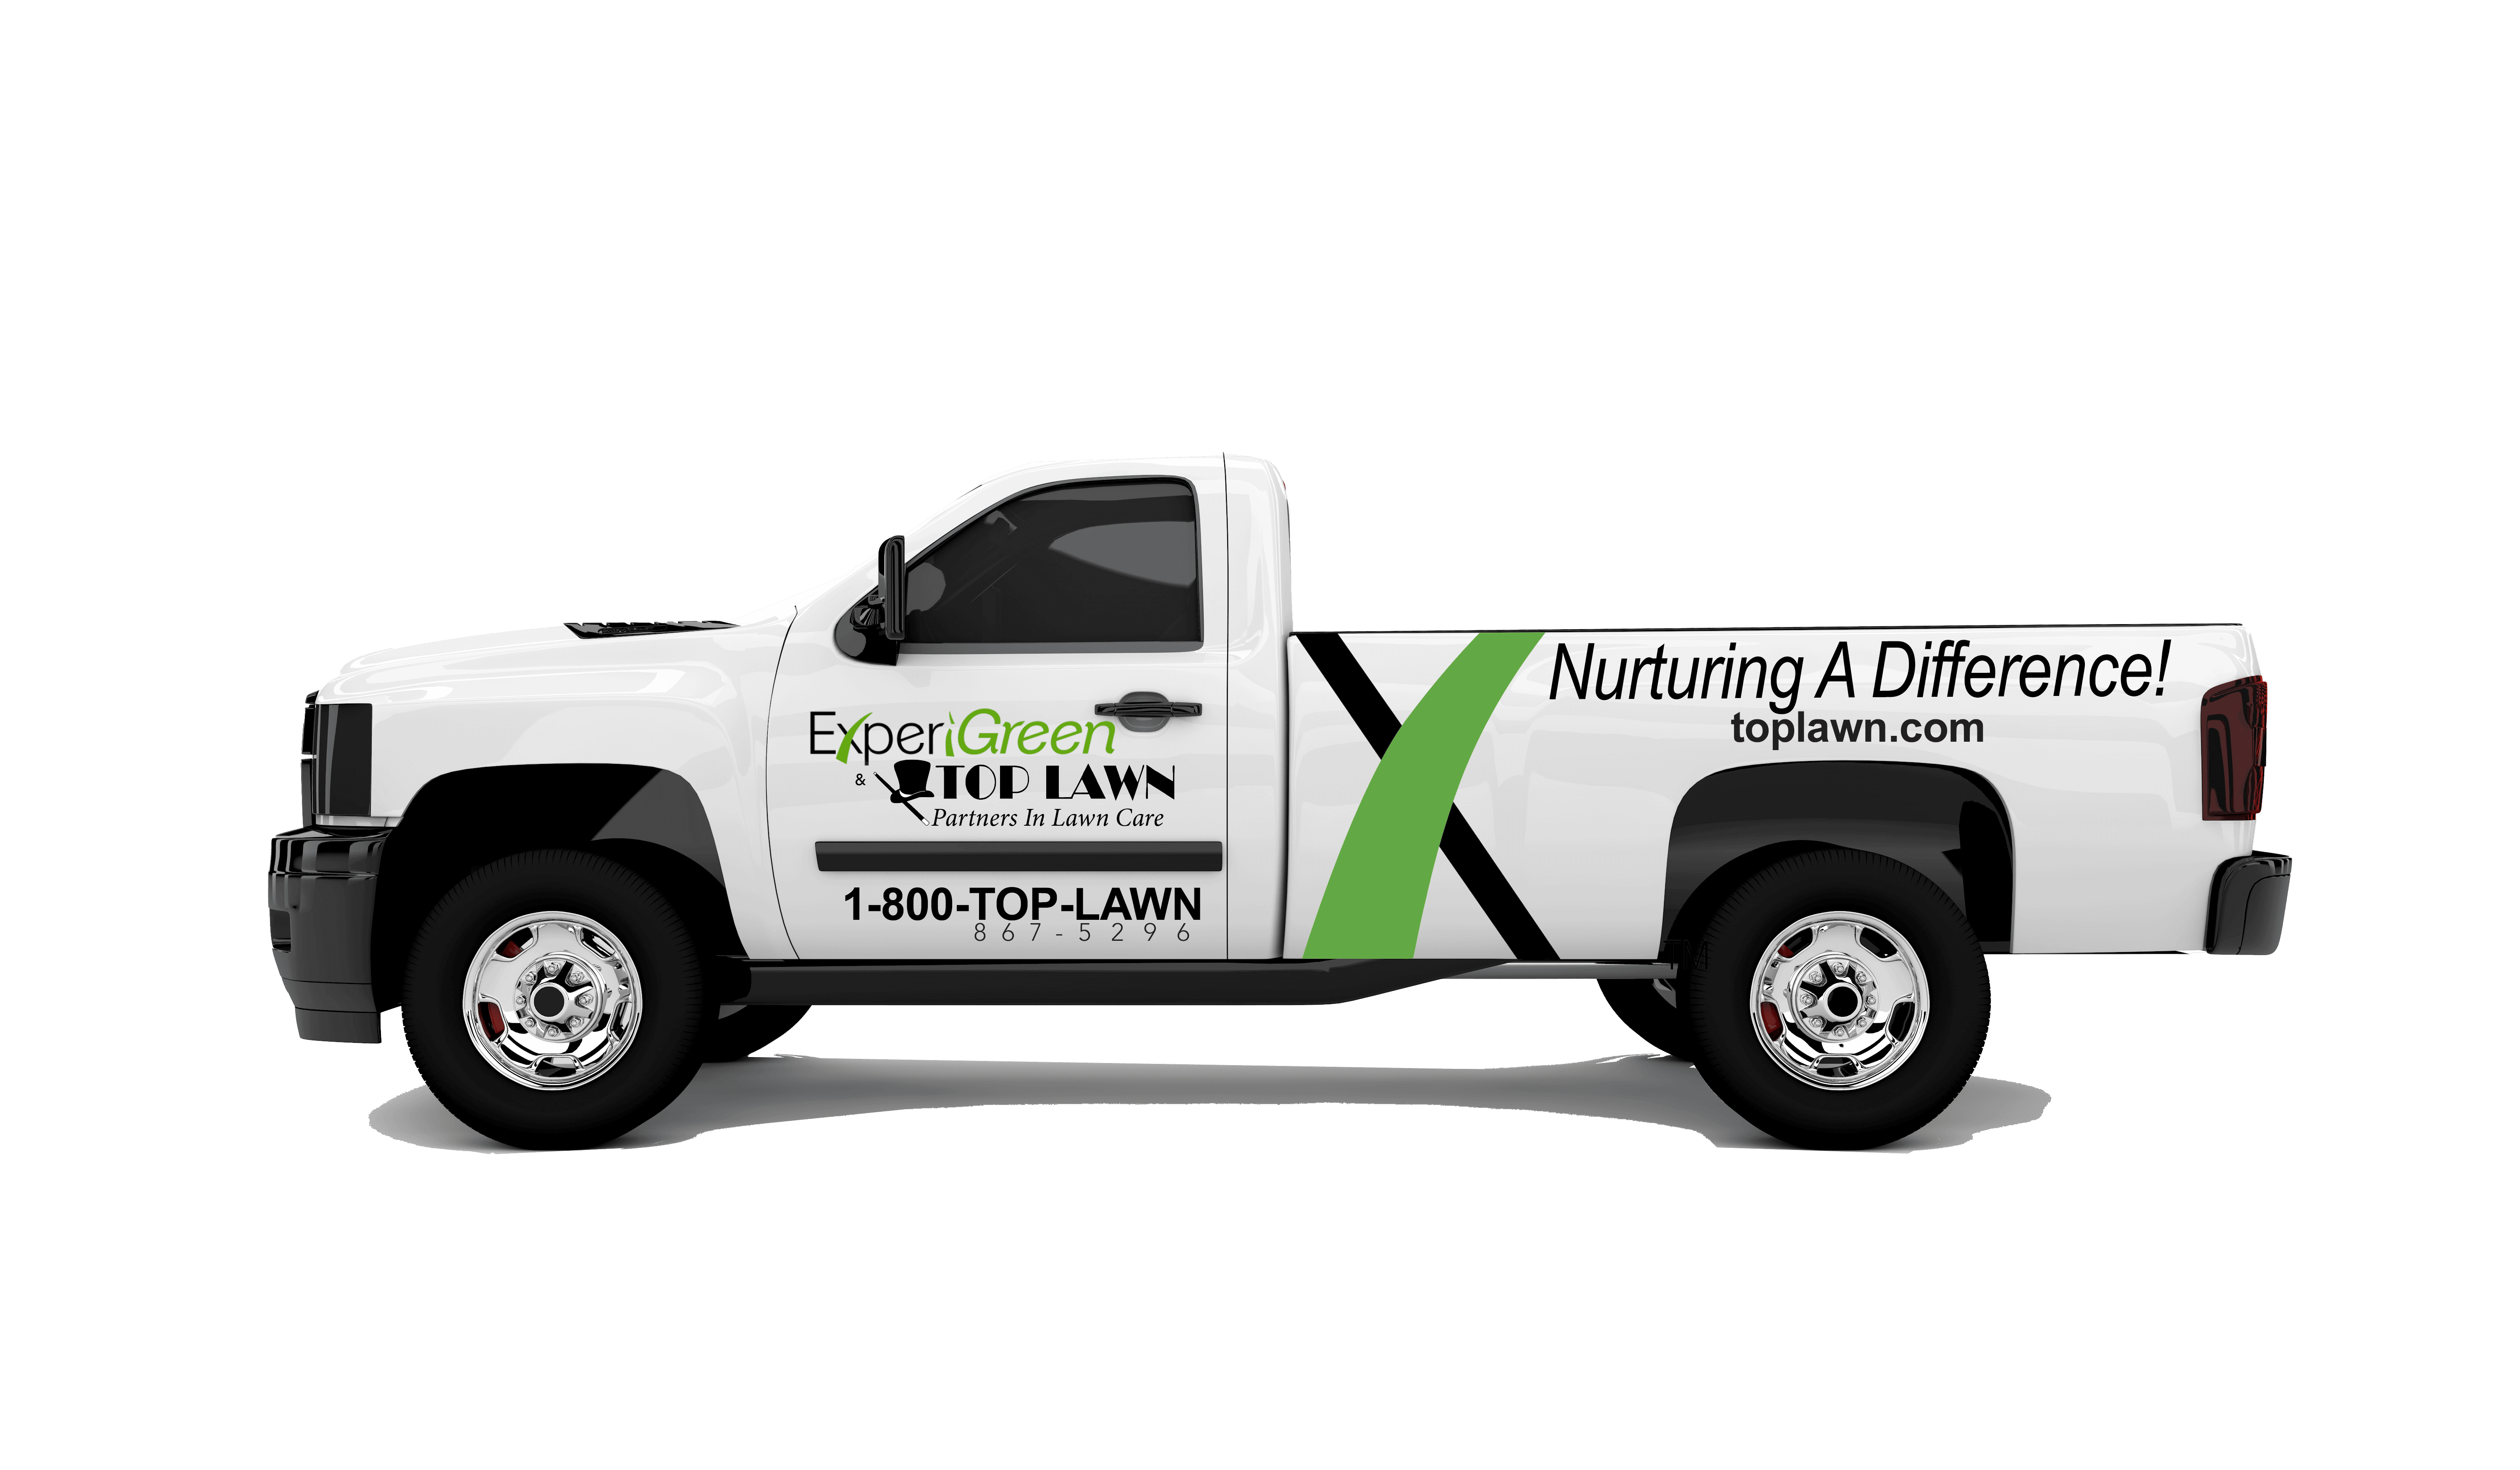 Top Lawn Pick Up Truck Image